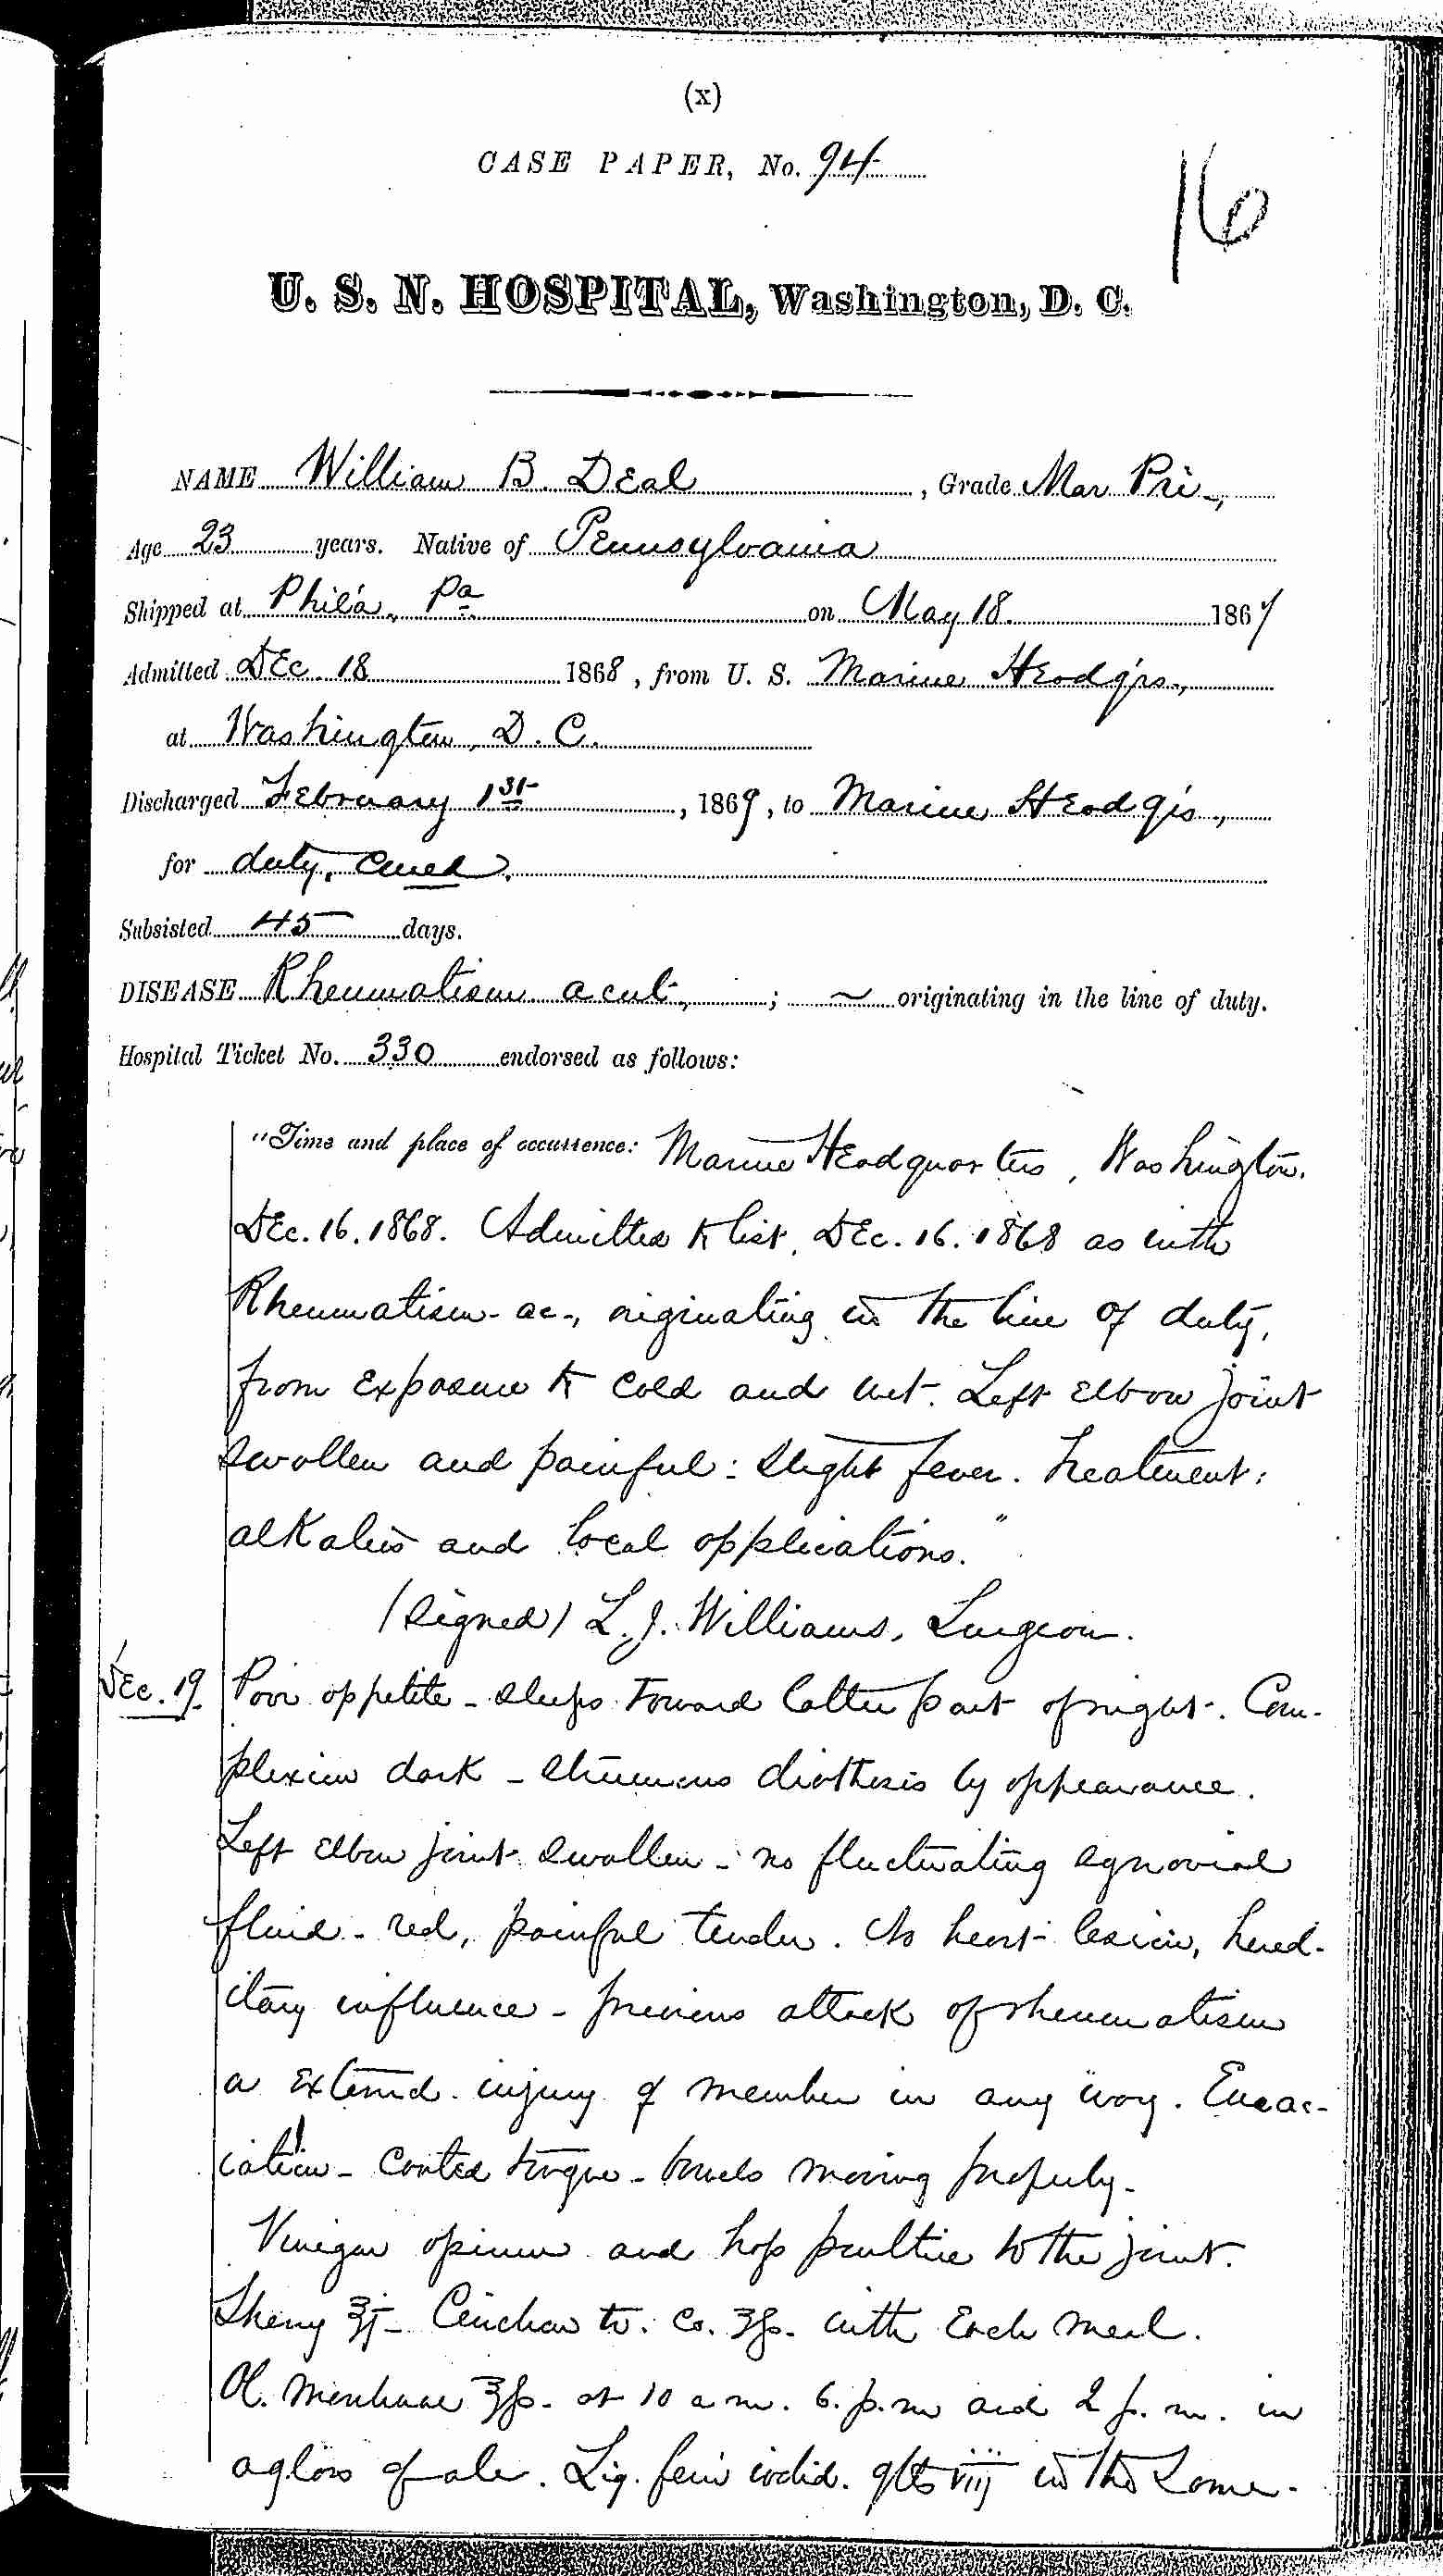 Entry for William B. Deal (page 1 of 4) in the log Hospital Tickets and Case Papers - Naval Hospital - Washington, D.C. - 1868-69